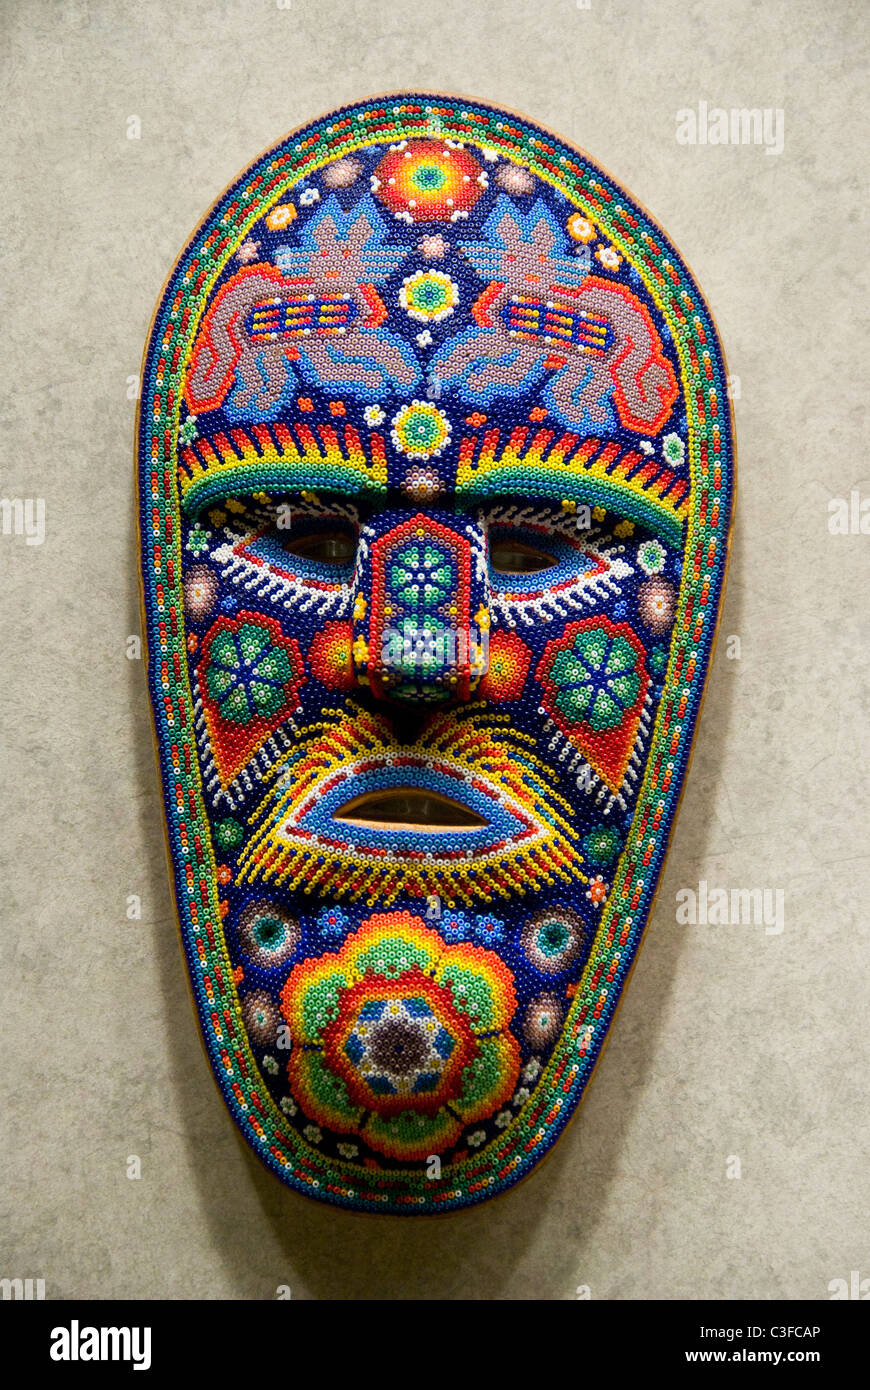 Mexico.Mexico city.National Museum of Anthropology. Huichol art. Stock Photo